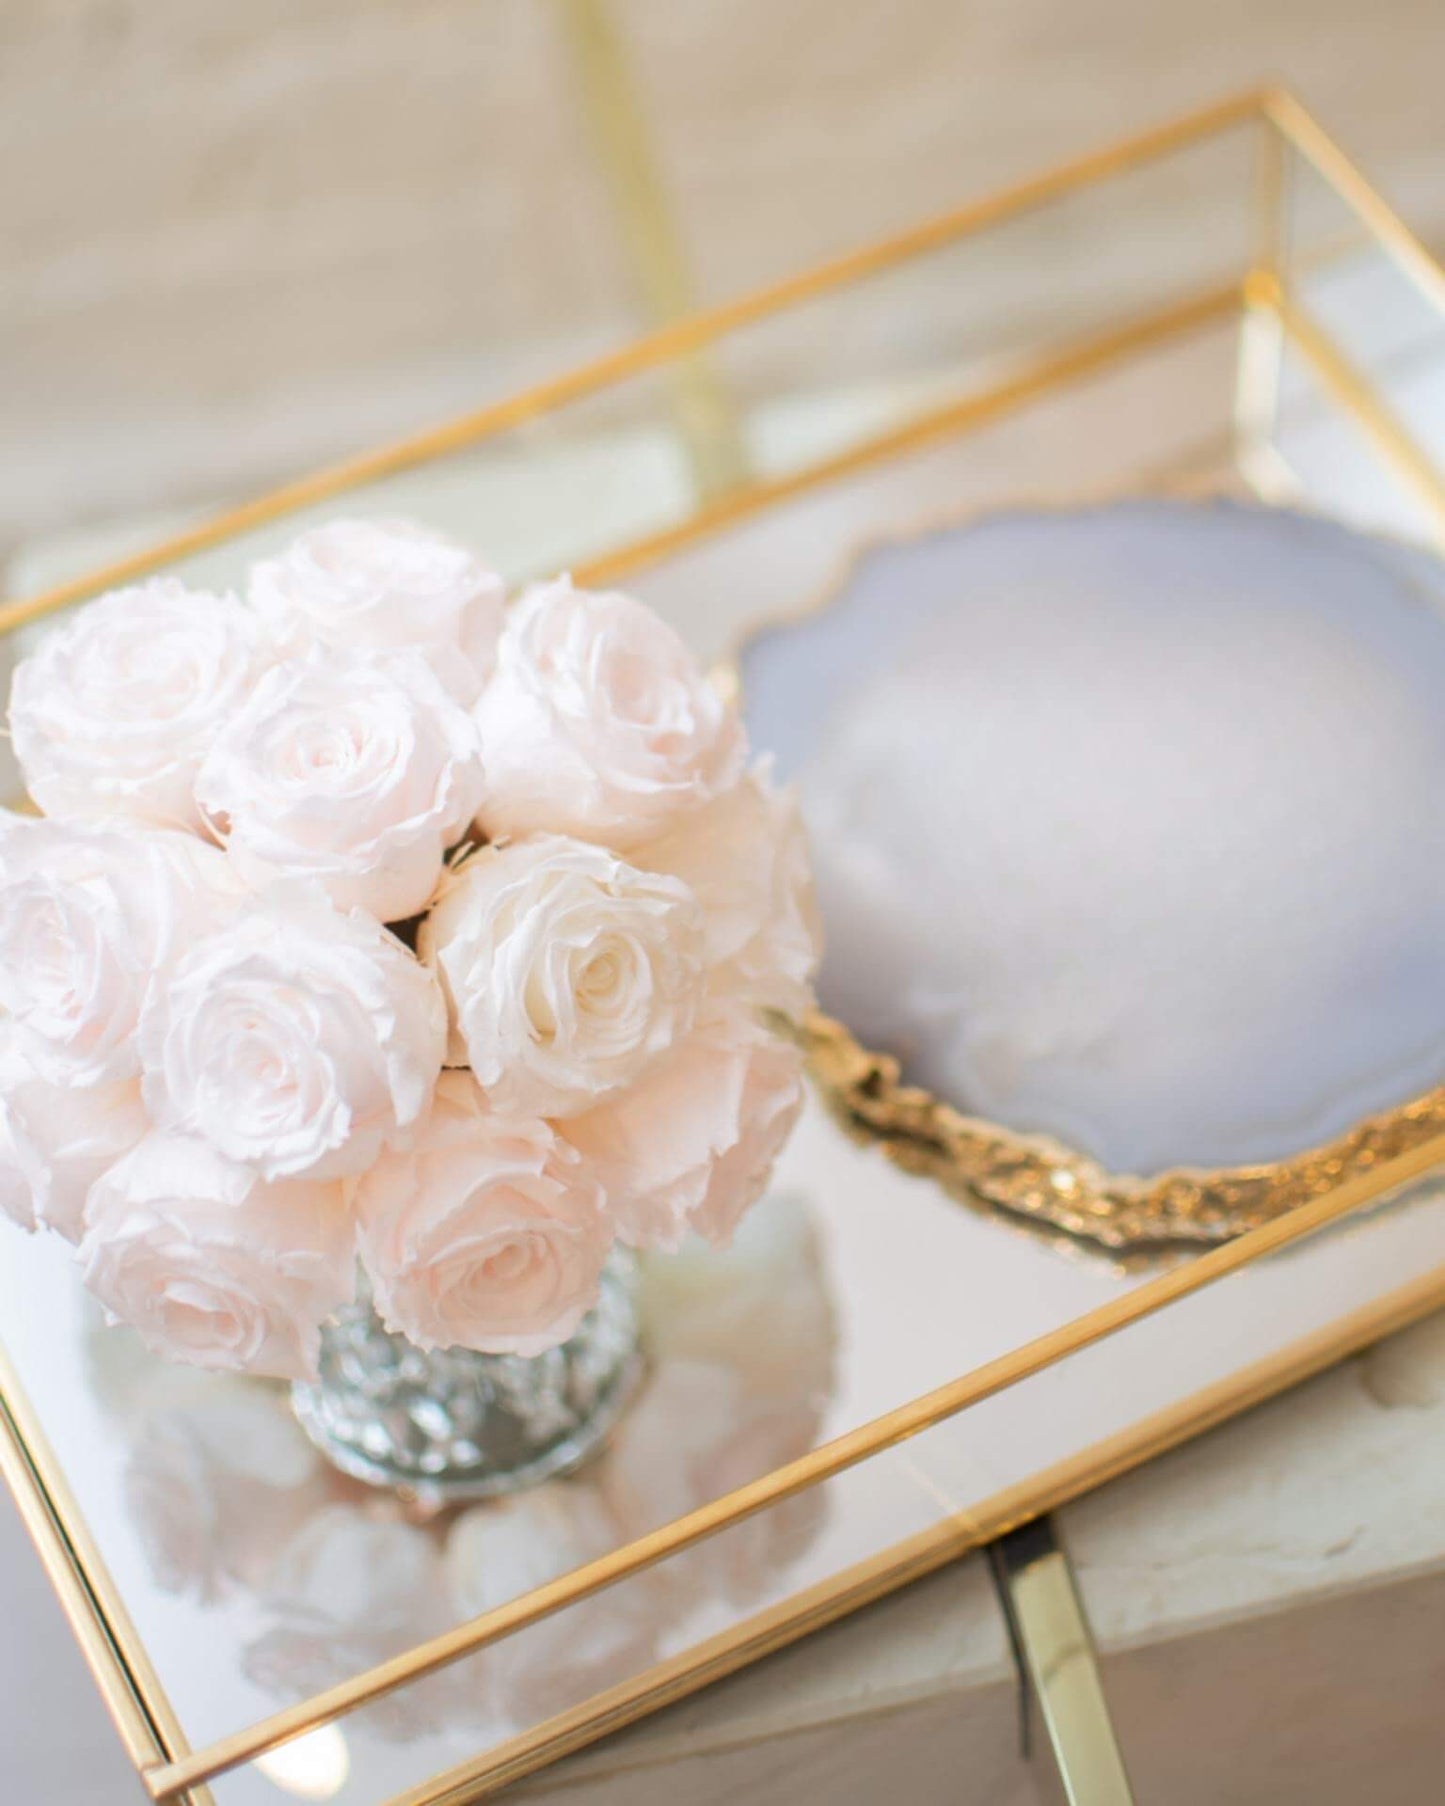 PETITE CRYSTAL VASE WITH PETITE PRESERVED ROSES - DOME SHAPE